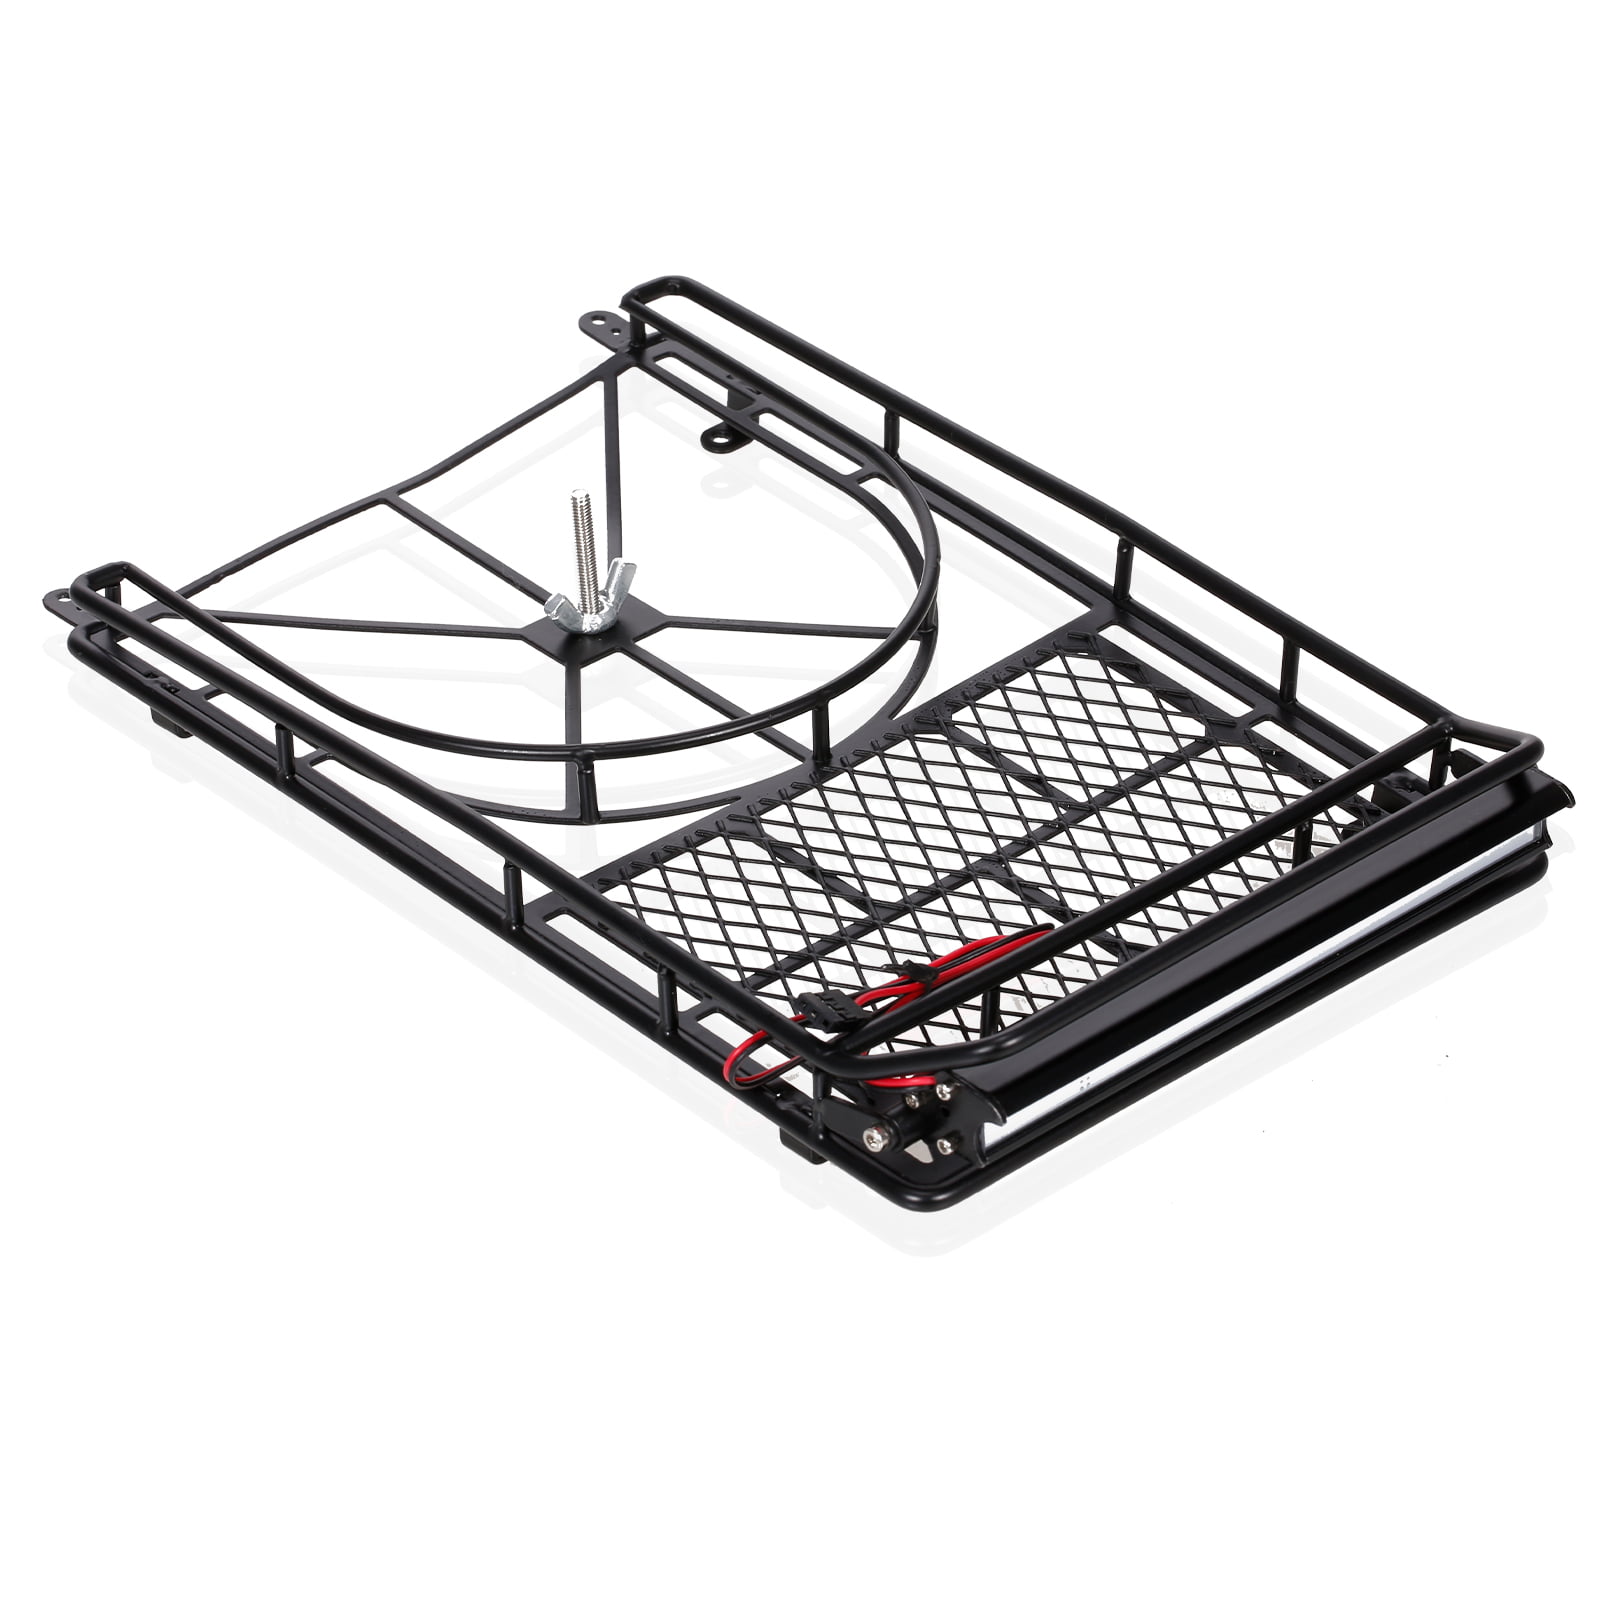 1:10 RC Car Roof Luggage Rack with 4 Leds Light for D90 Rc4wd Axial scx10